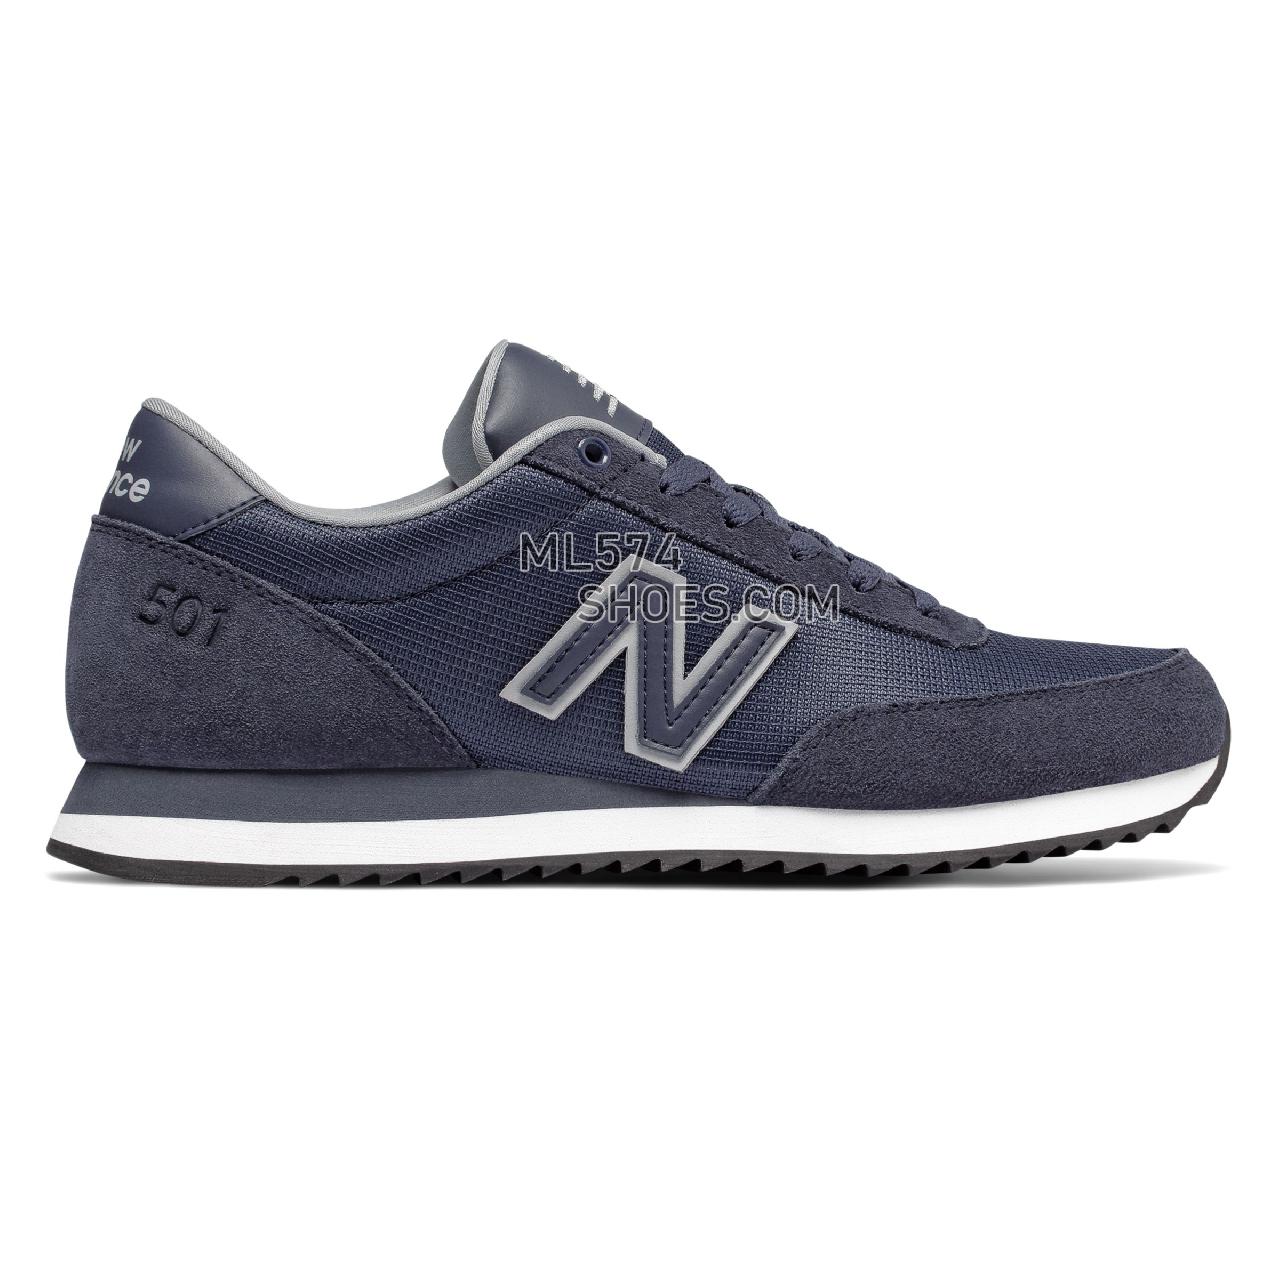 New Balance 501 Ripple Sole - Men's 501 - Classic Navy with Silver Mink - MZ501CRA